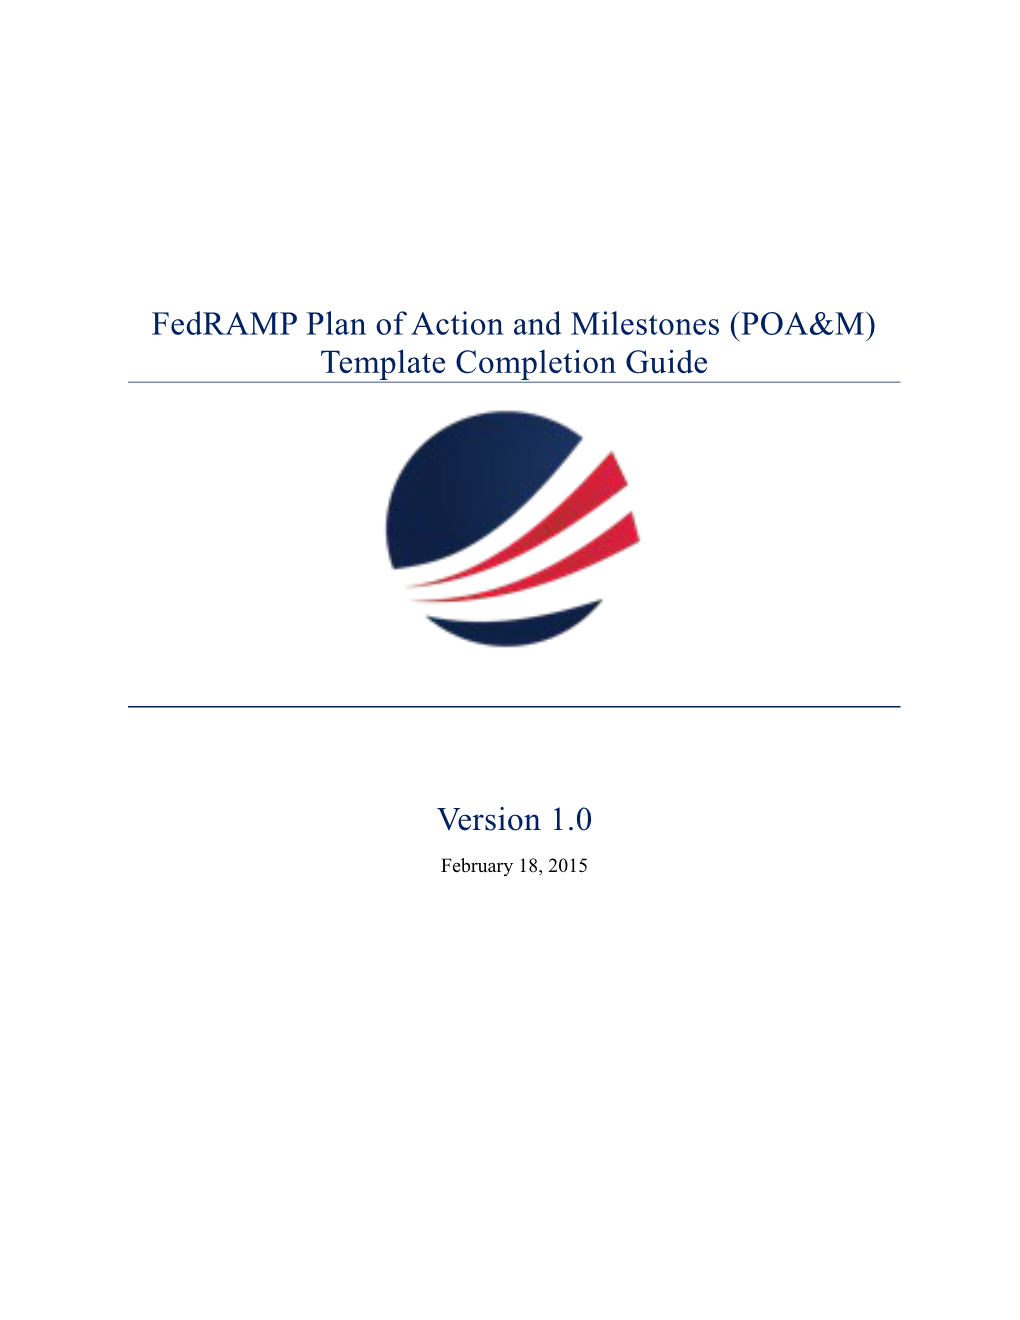 Fedramp Plan of Action and Milestones (POA&M) Template Completion Guide